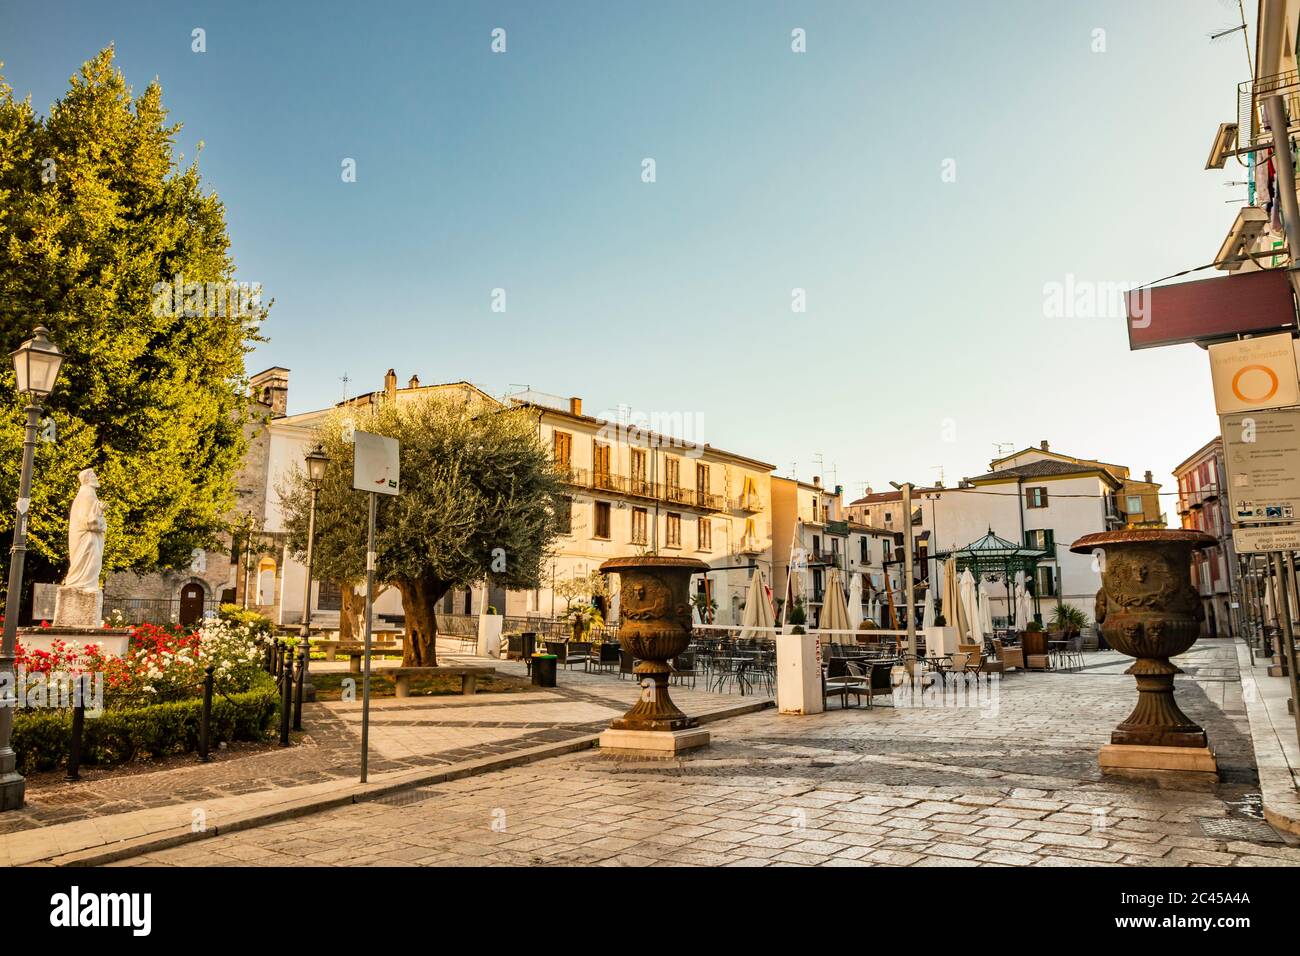 October 27, 2019 - Isernia, Molise, Italy - The deserted square in the city center. The closed umbrellas and the empty tables of the bars and restaura Stock Photo